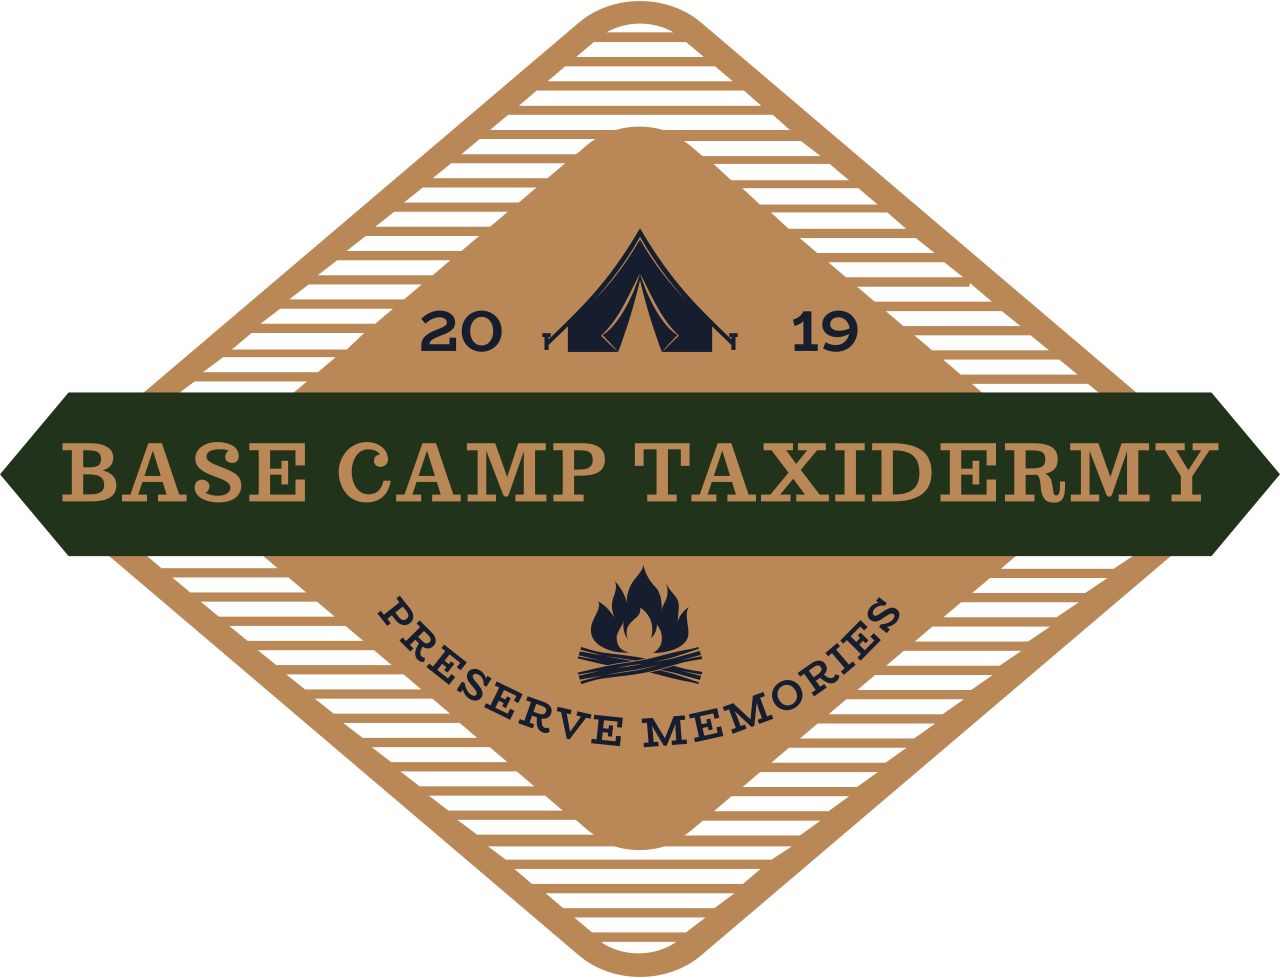 Base Camp Taxidermy's web page